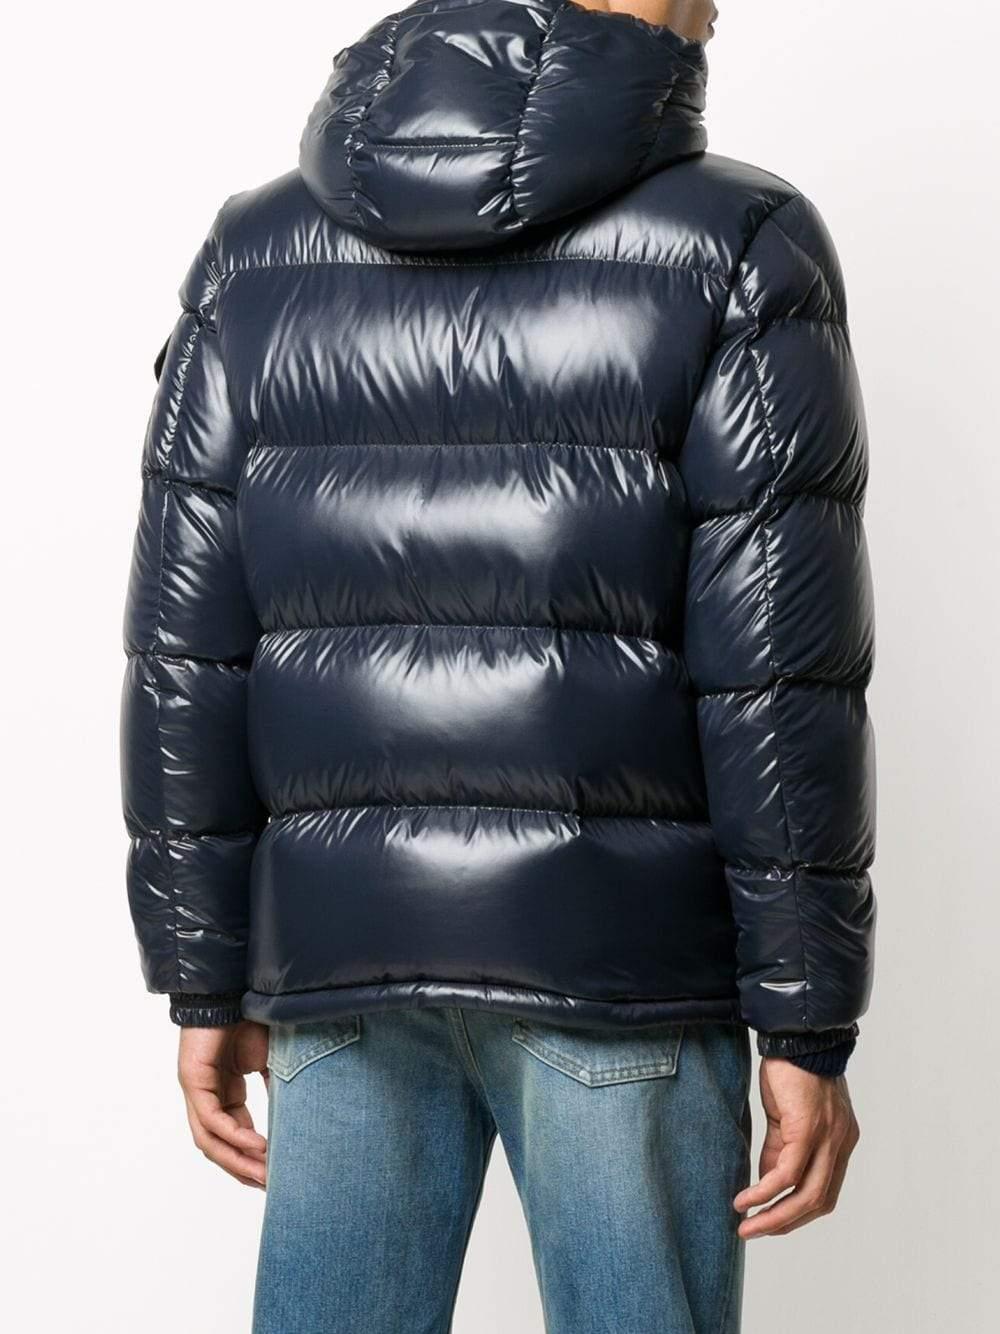 Moncler Synthetic Ecrins Down Jacket in Navy (Blue) for Men - Save 